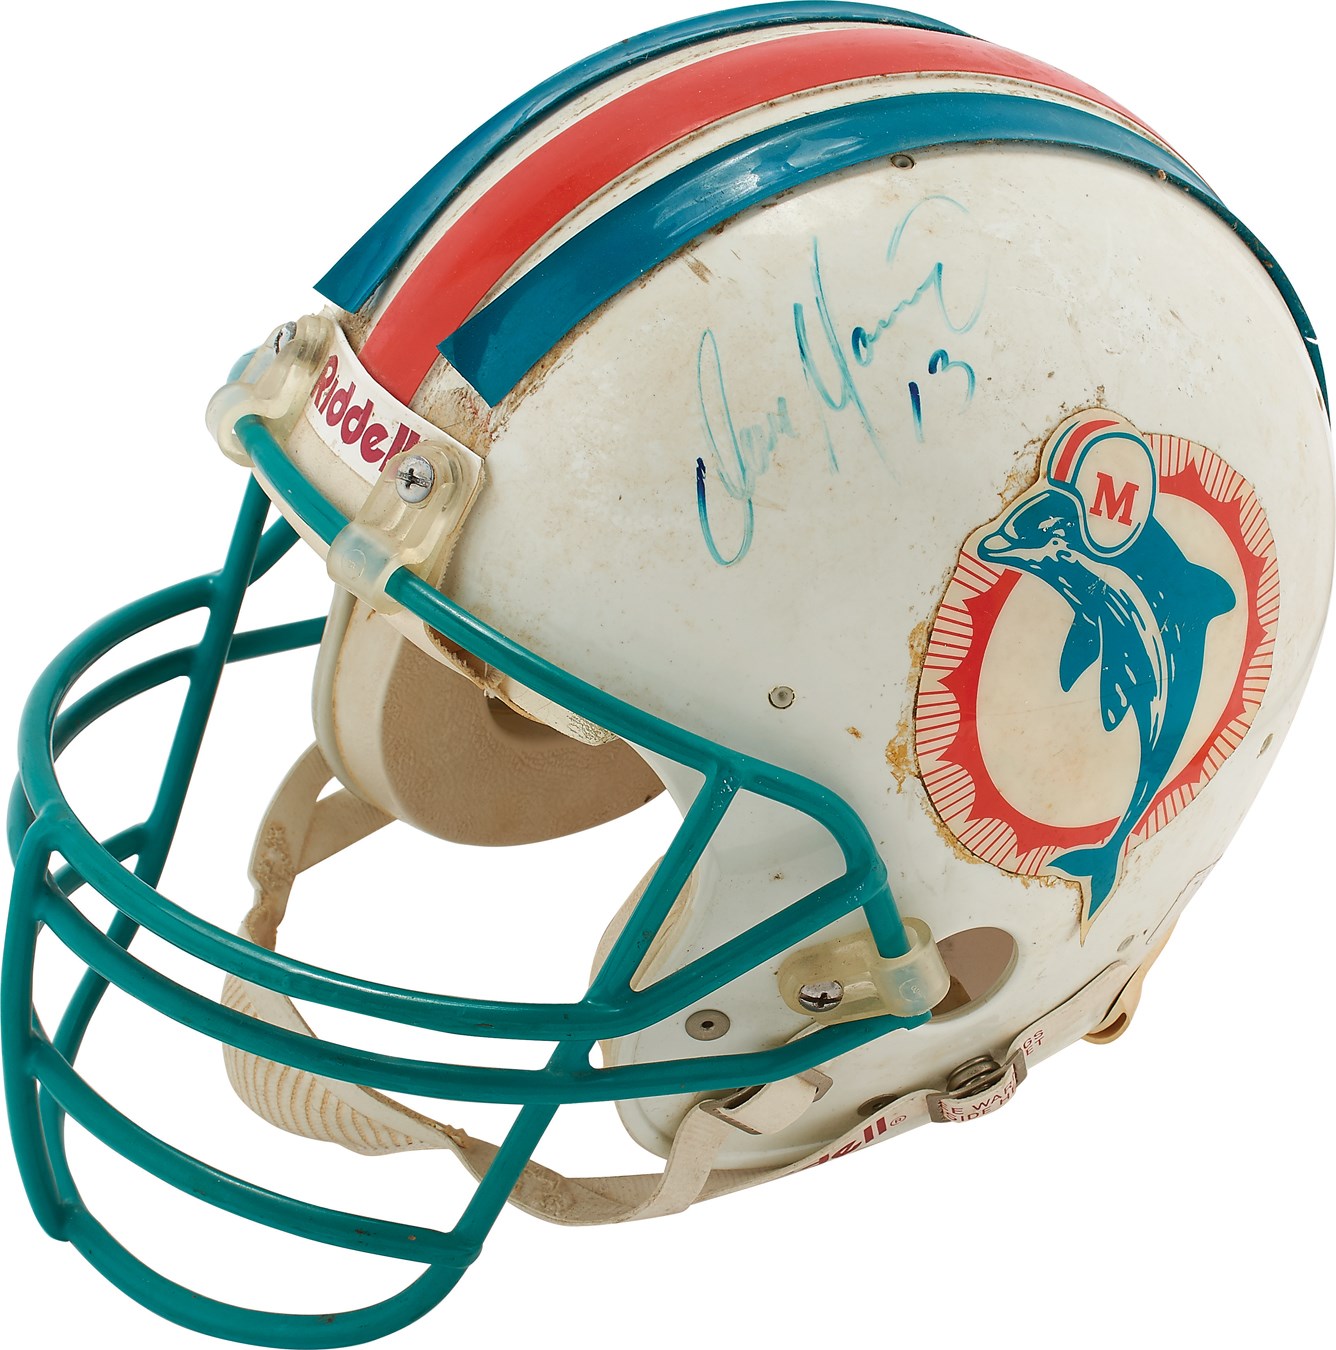 1984-86 Miami Dolphins Game Used Helmet Vintage-Signed by Dan Marino